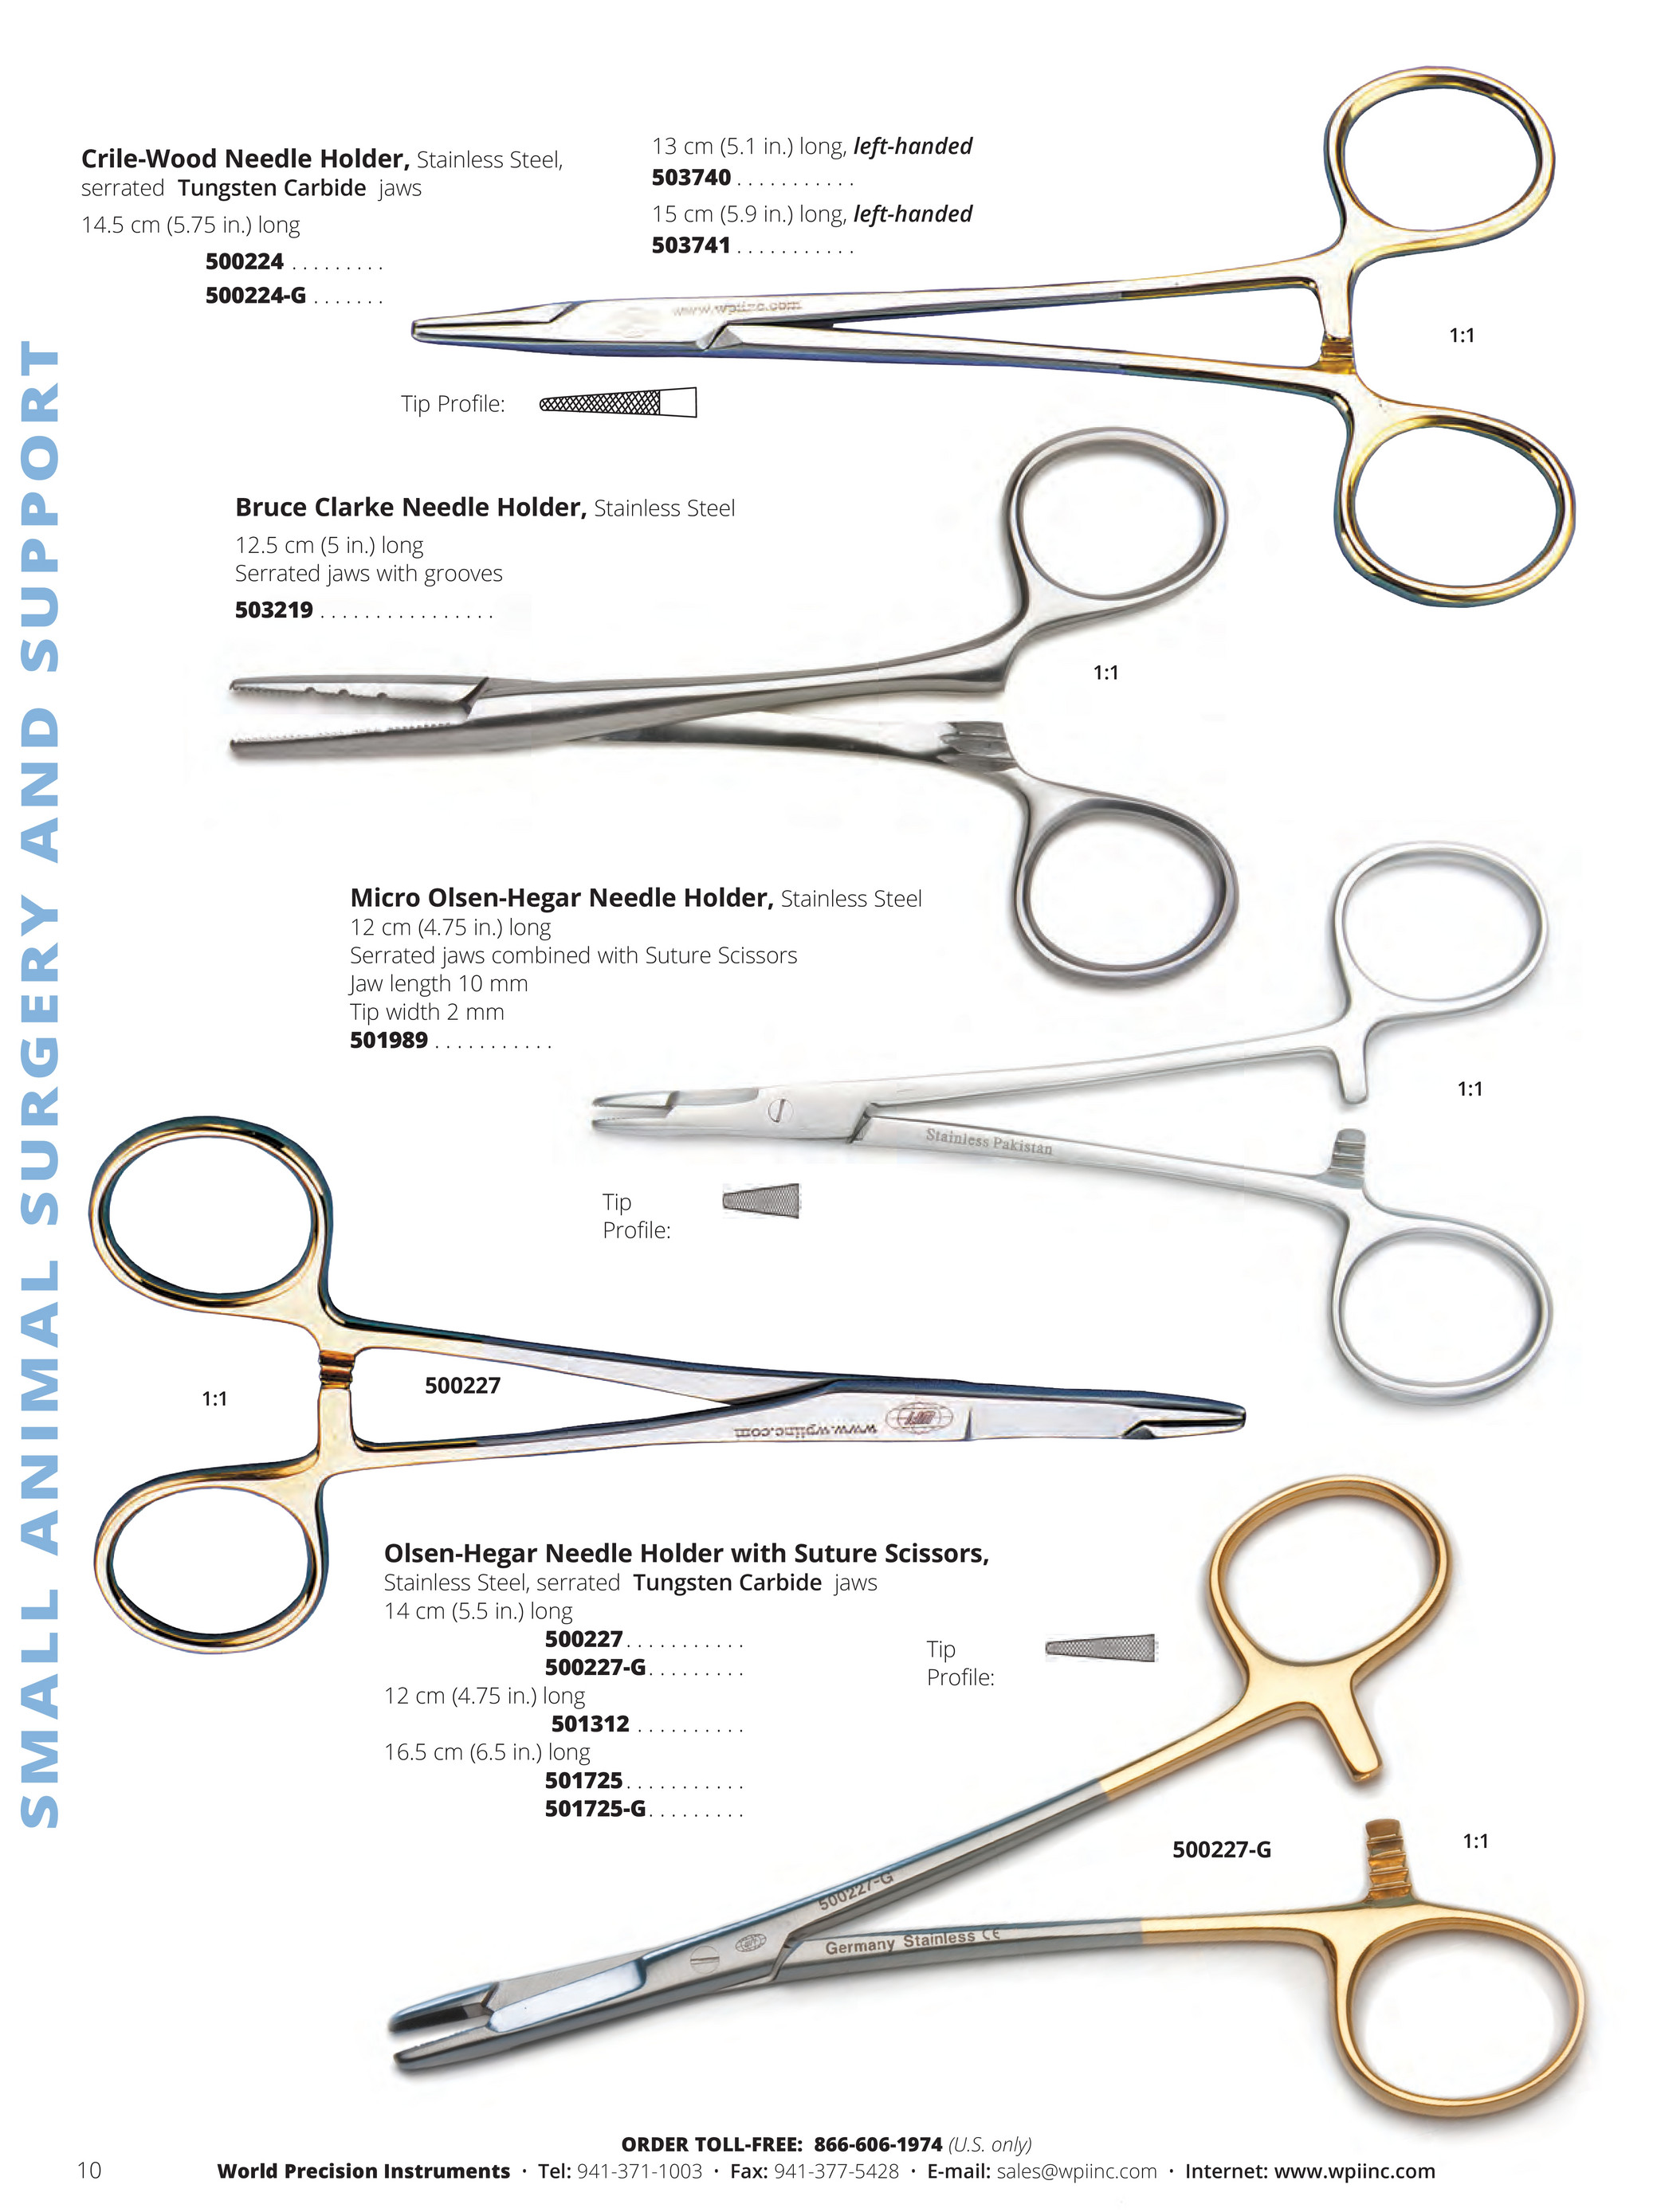 World Precision Instruments - 2016-Small Animal Surgery Catalog - Page 12-13